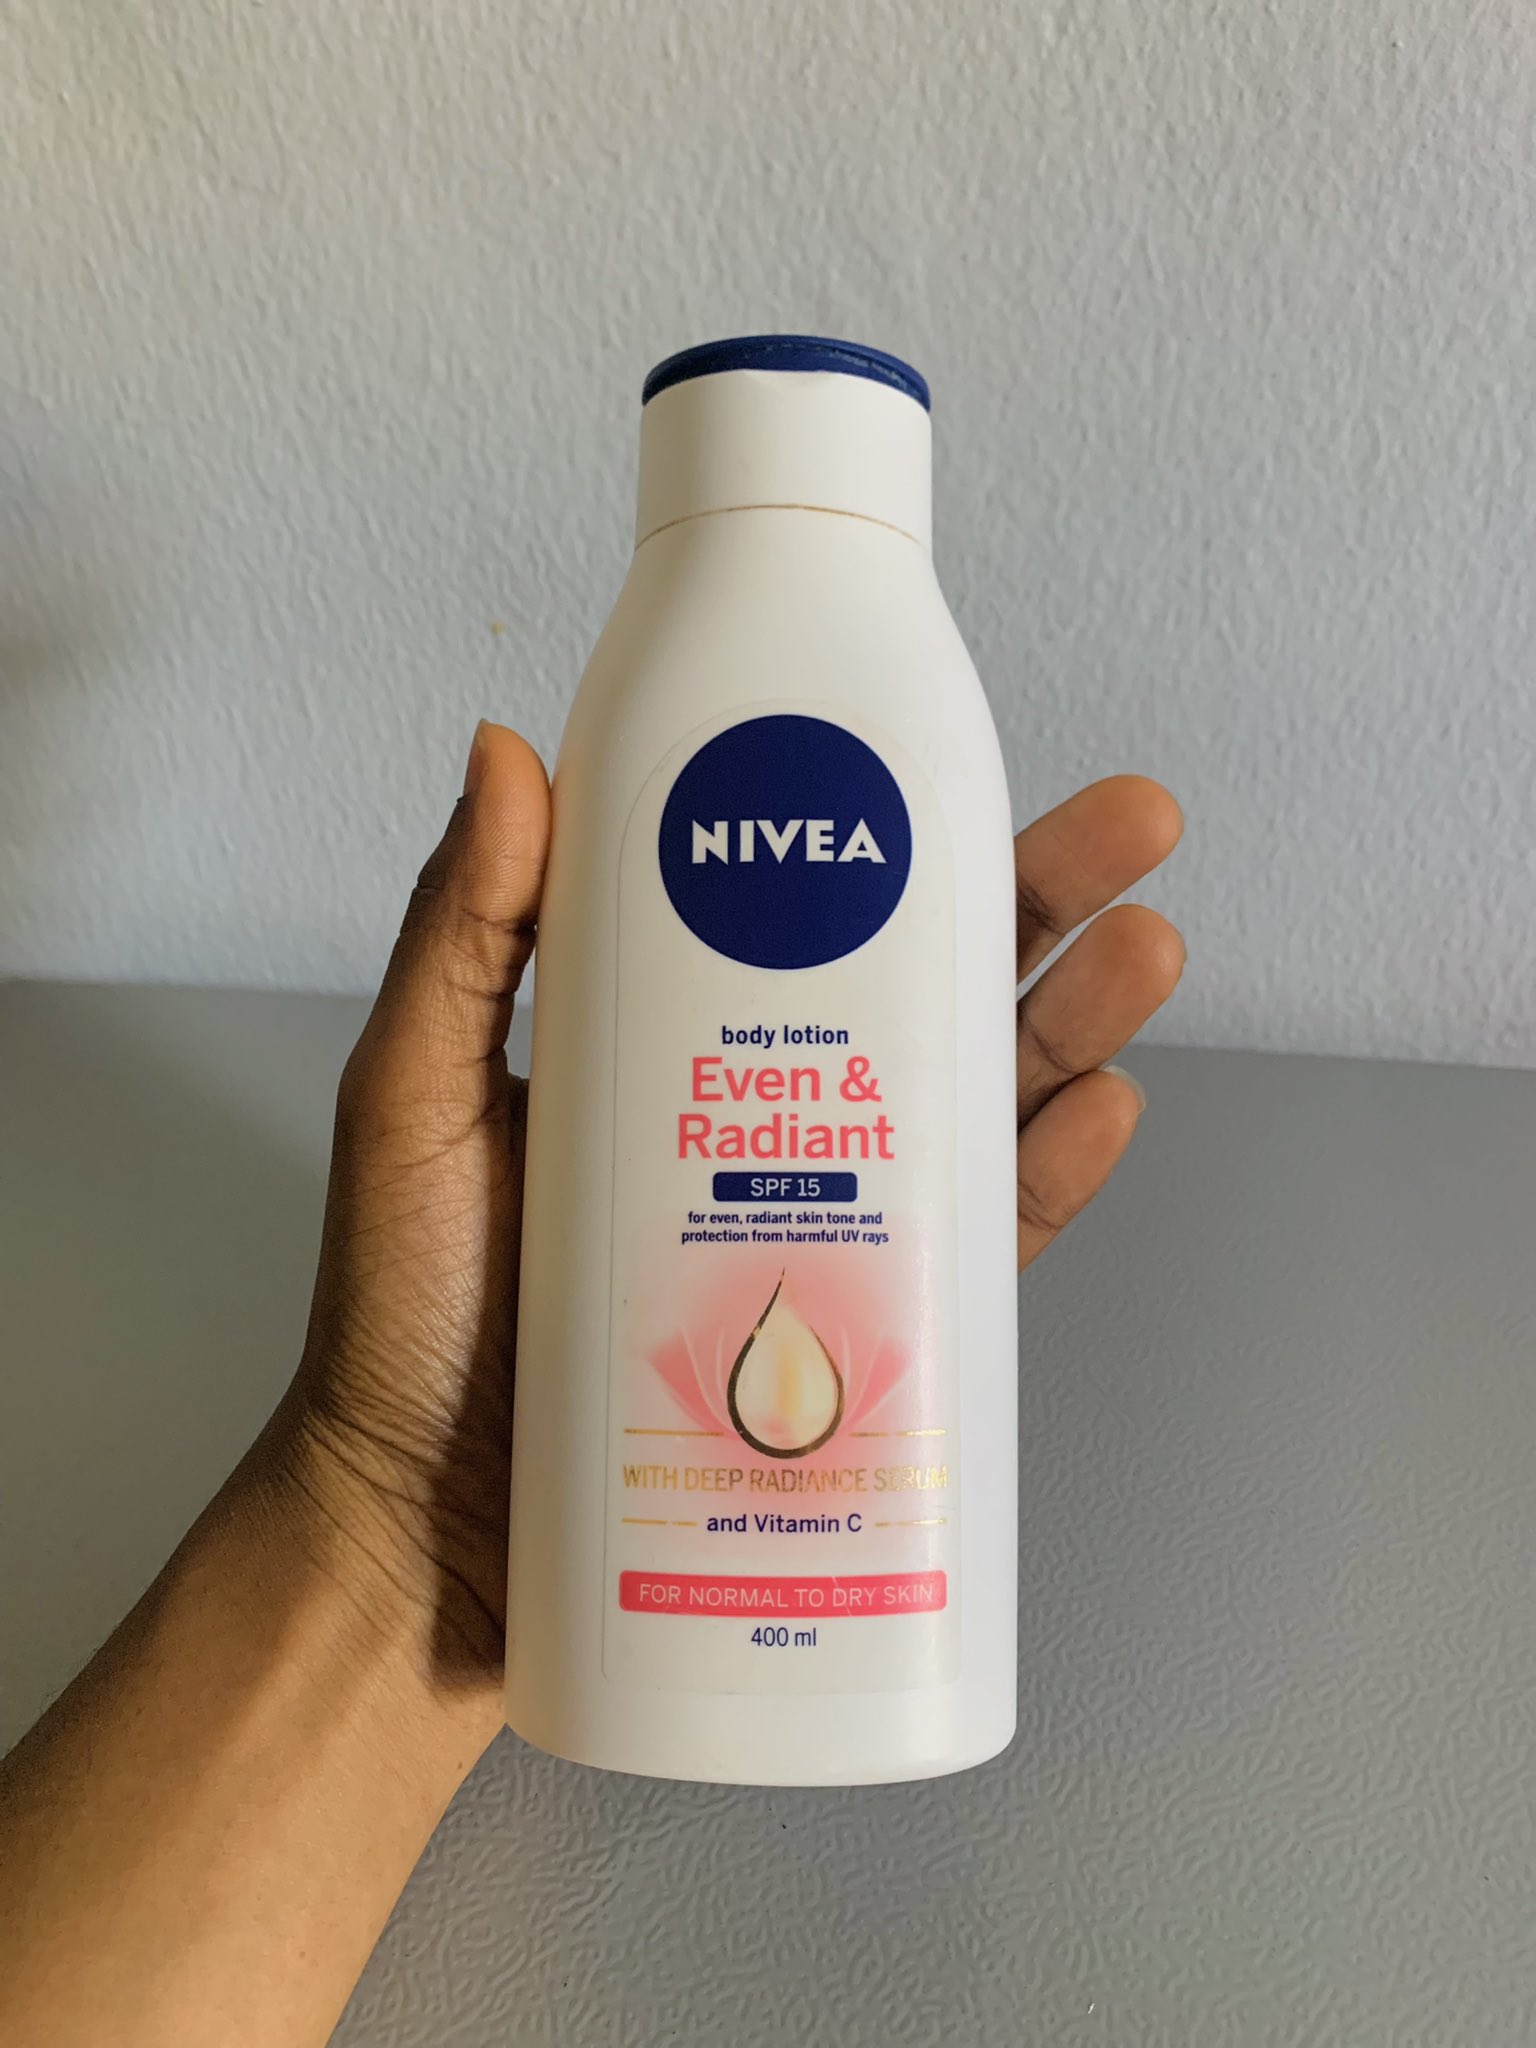 _sheisfolake🌻 on Twitter: "This is the best Nivea body lotion I've so far, I almost gave up on Nivea untill I got this. https://t.co/S8iFnbYNTS" /